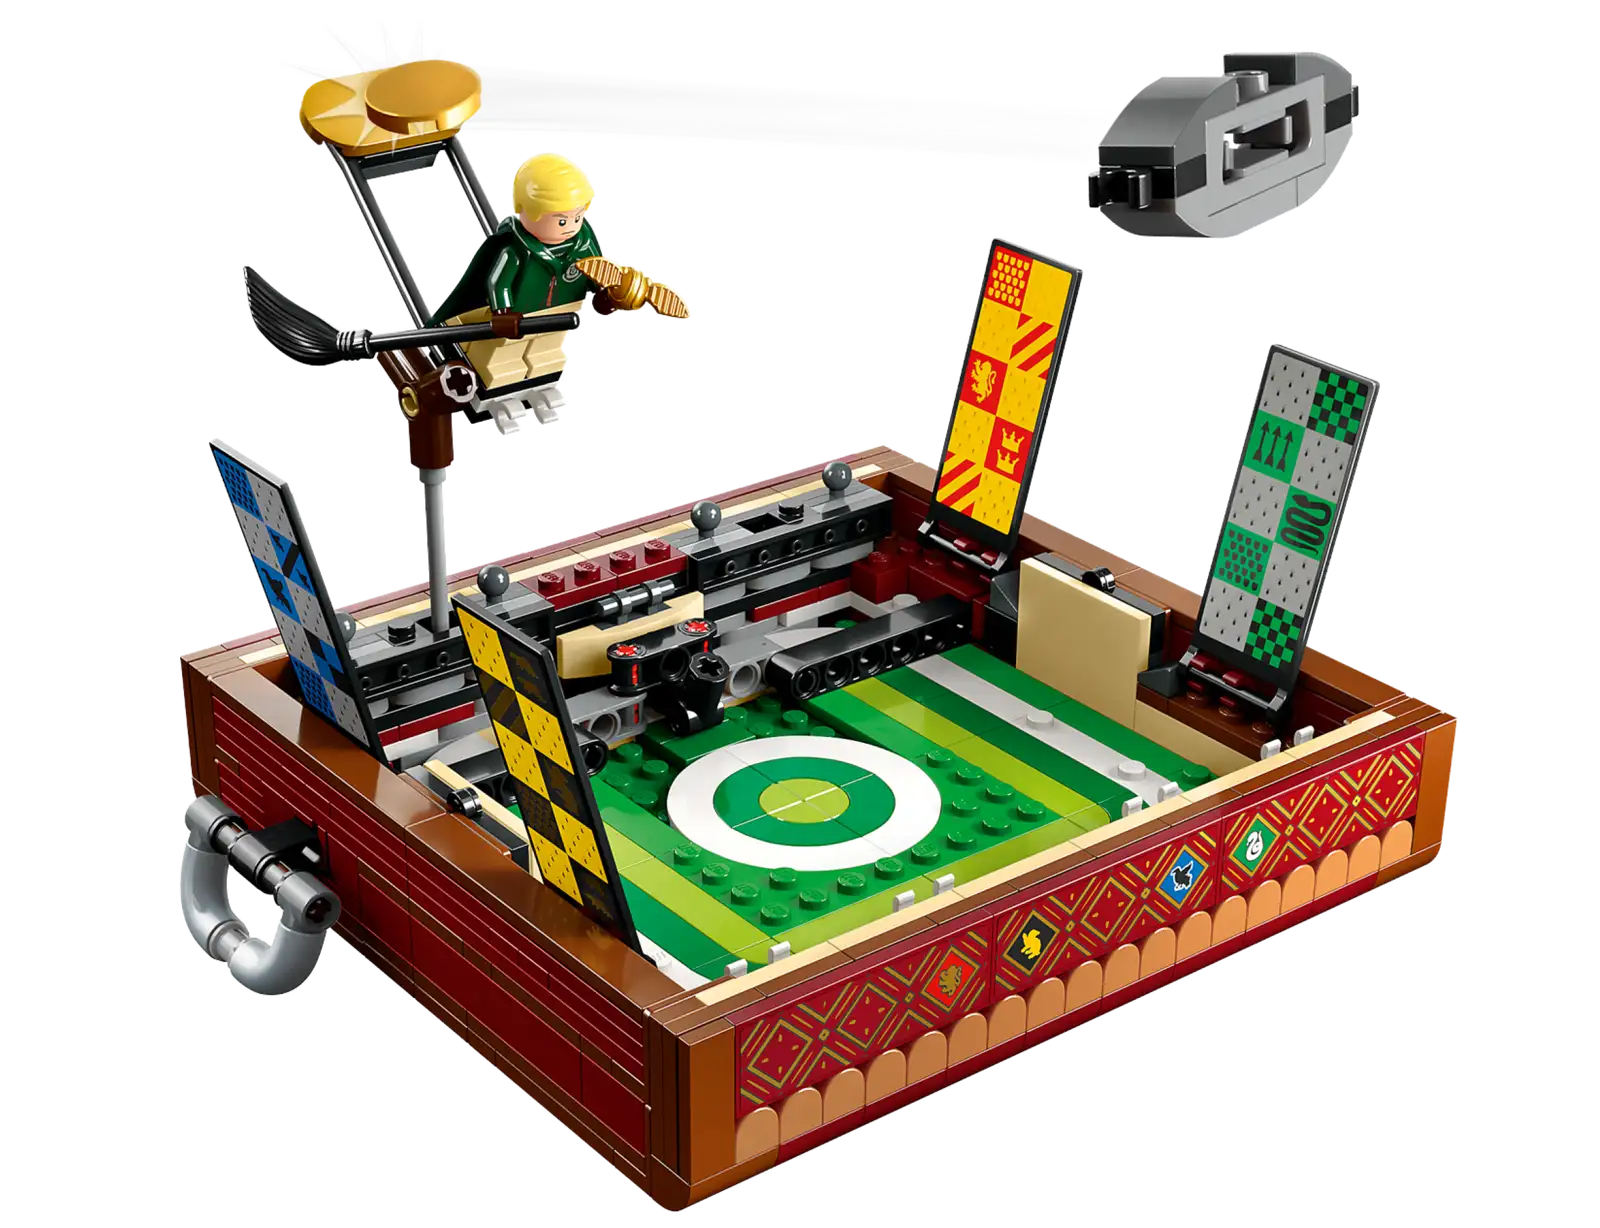 LEGO Harry Potter Quidditch Trunk Toy 76416